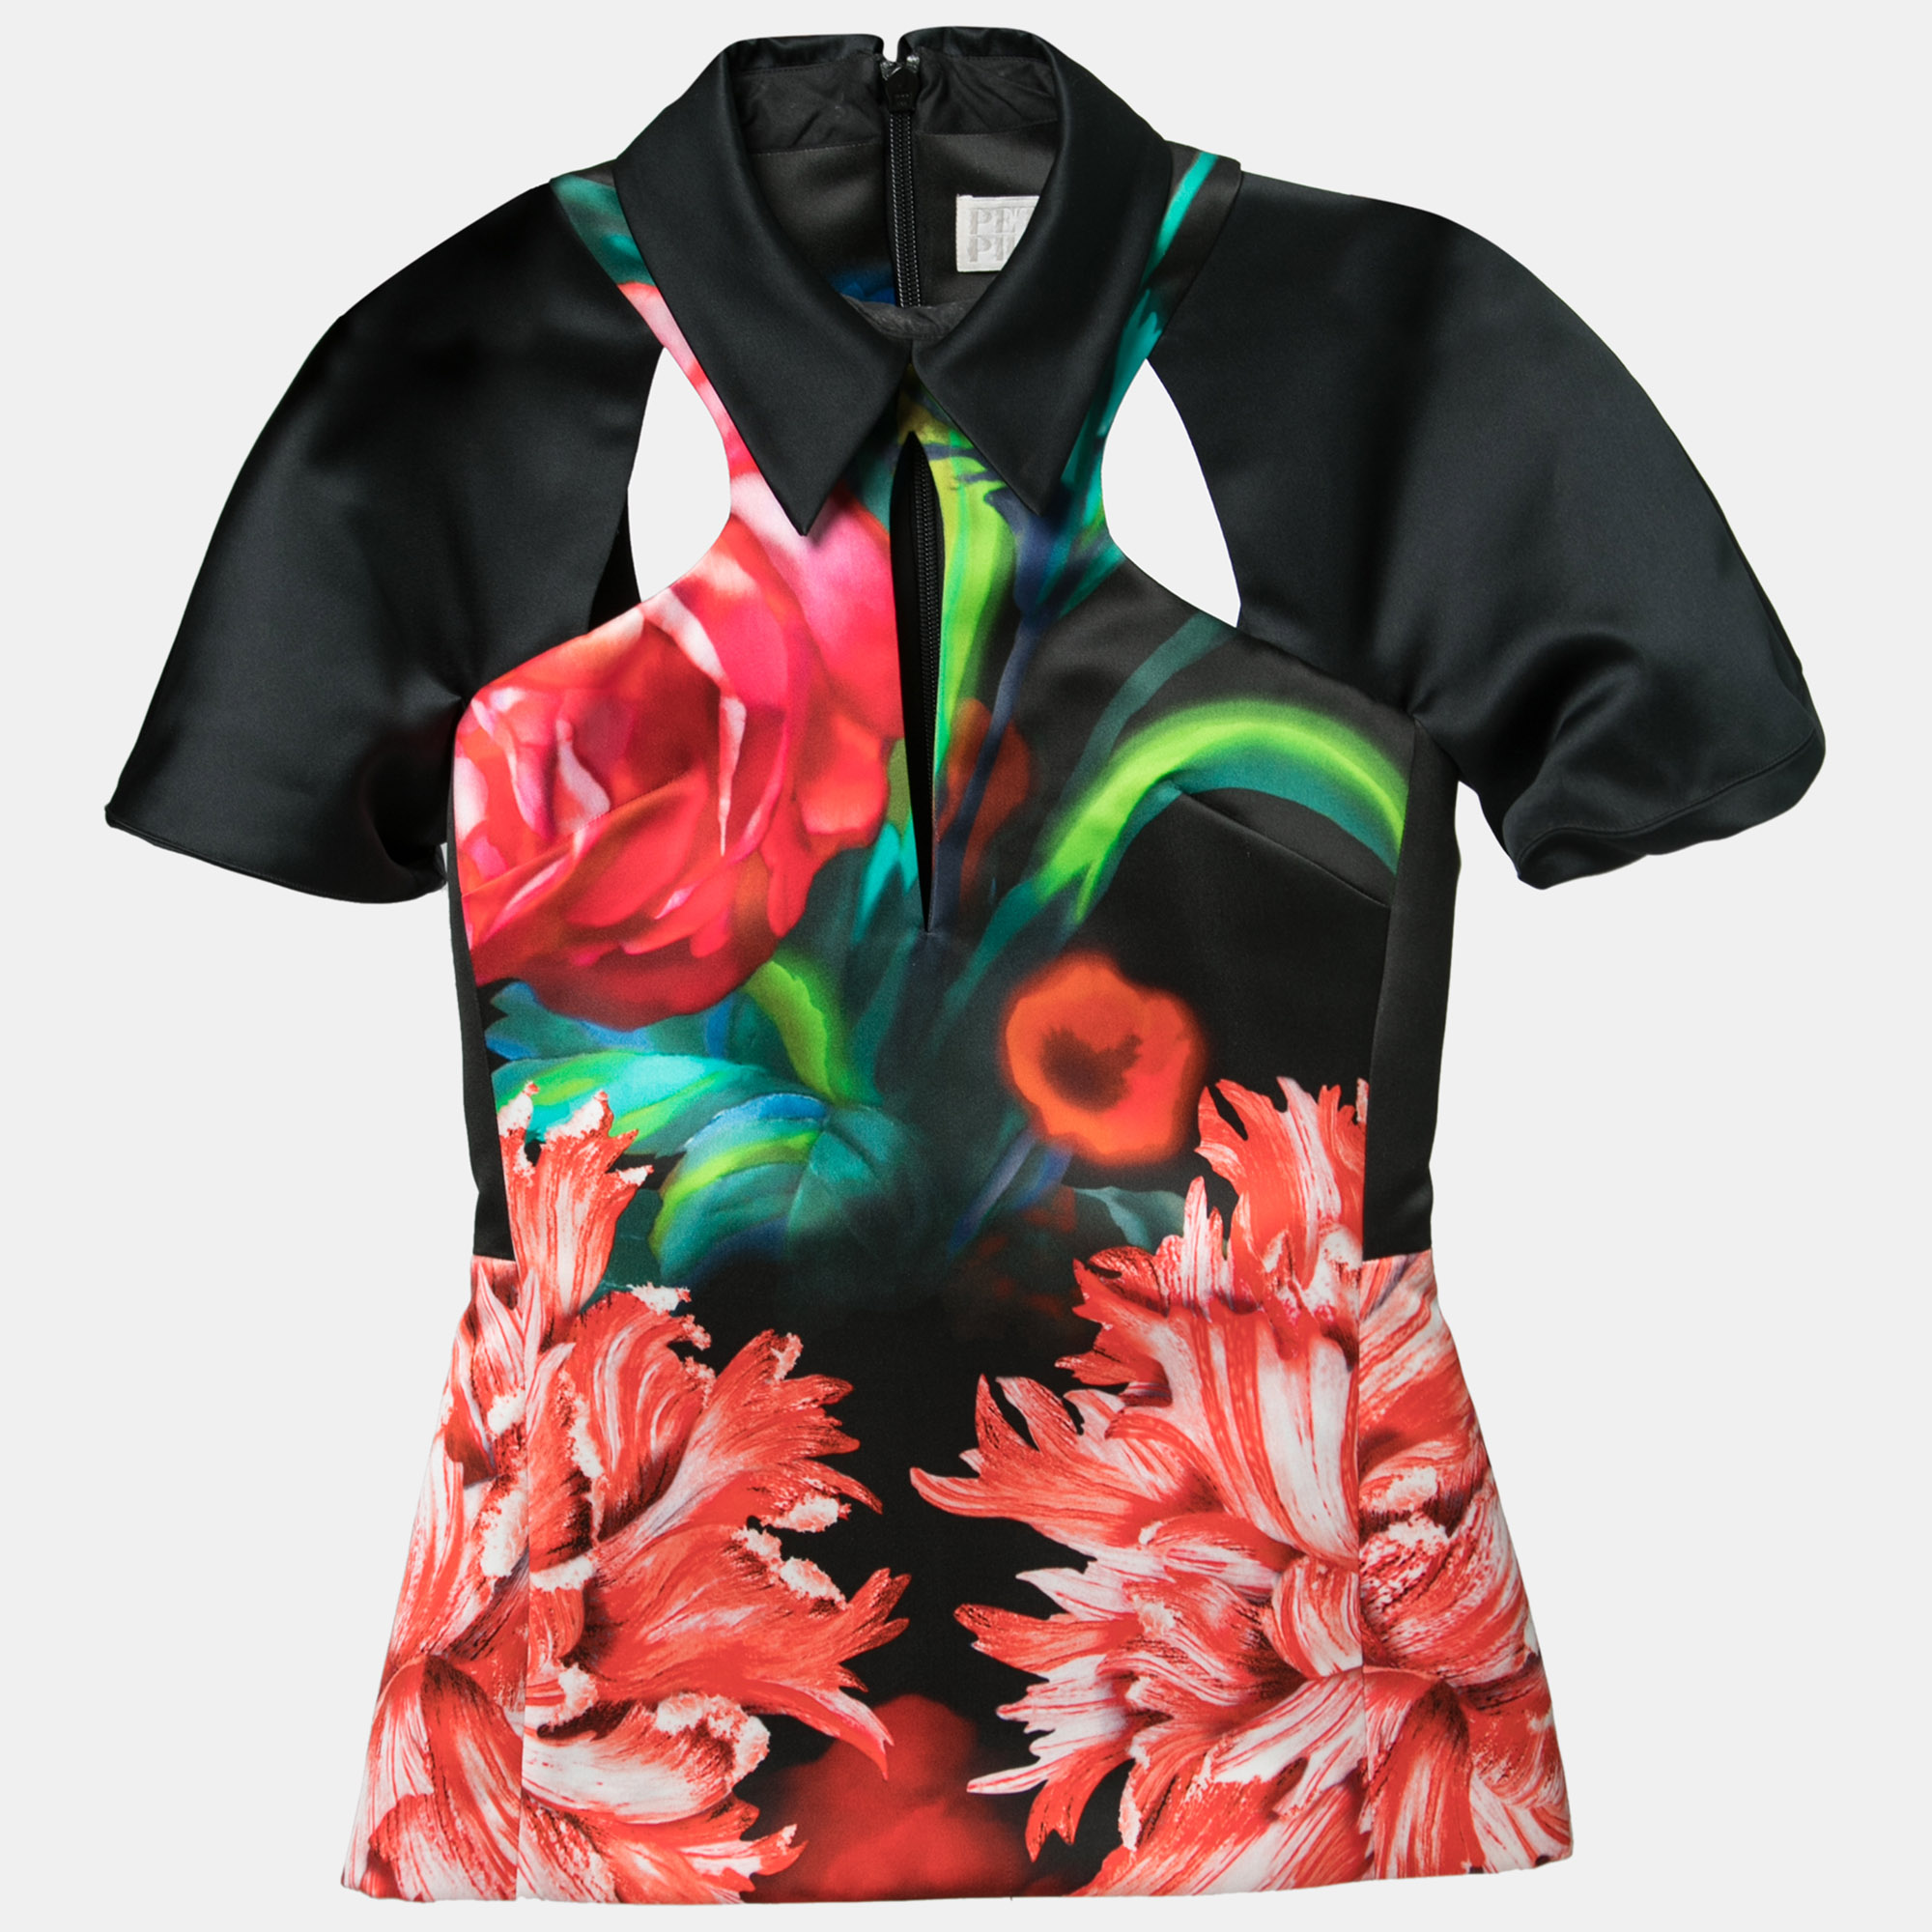 Peter Pilotto Black Floral Printed Satin Cut-Out Detail Top S